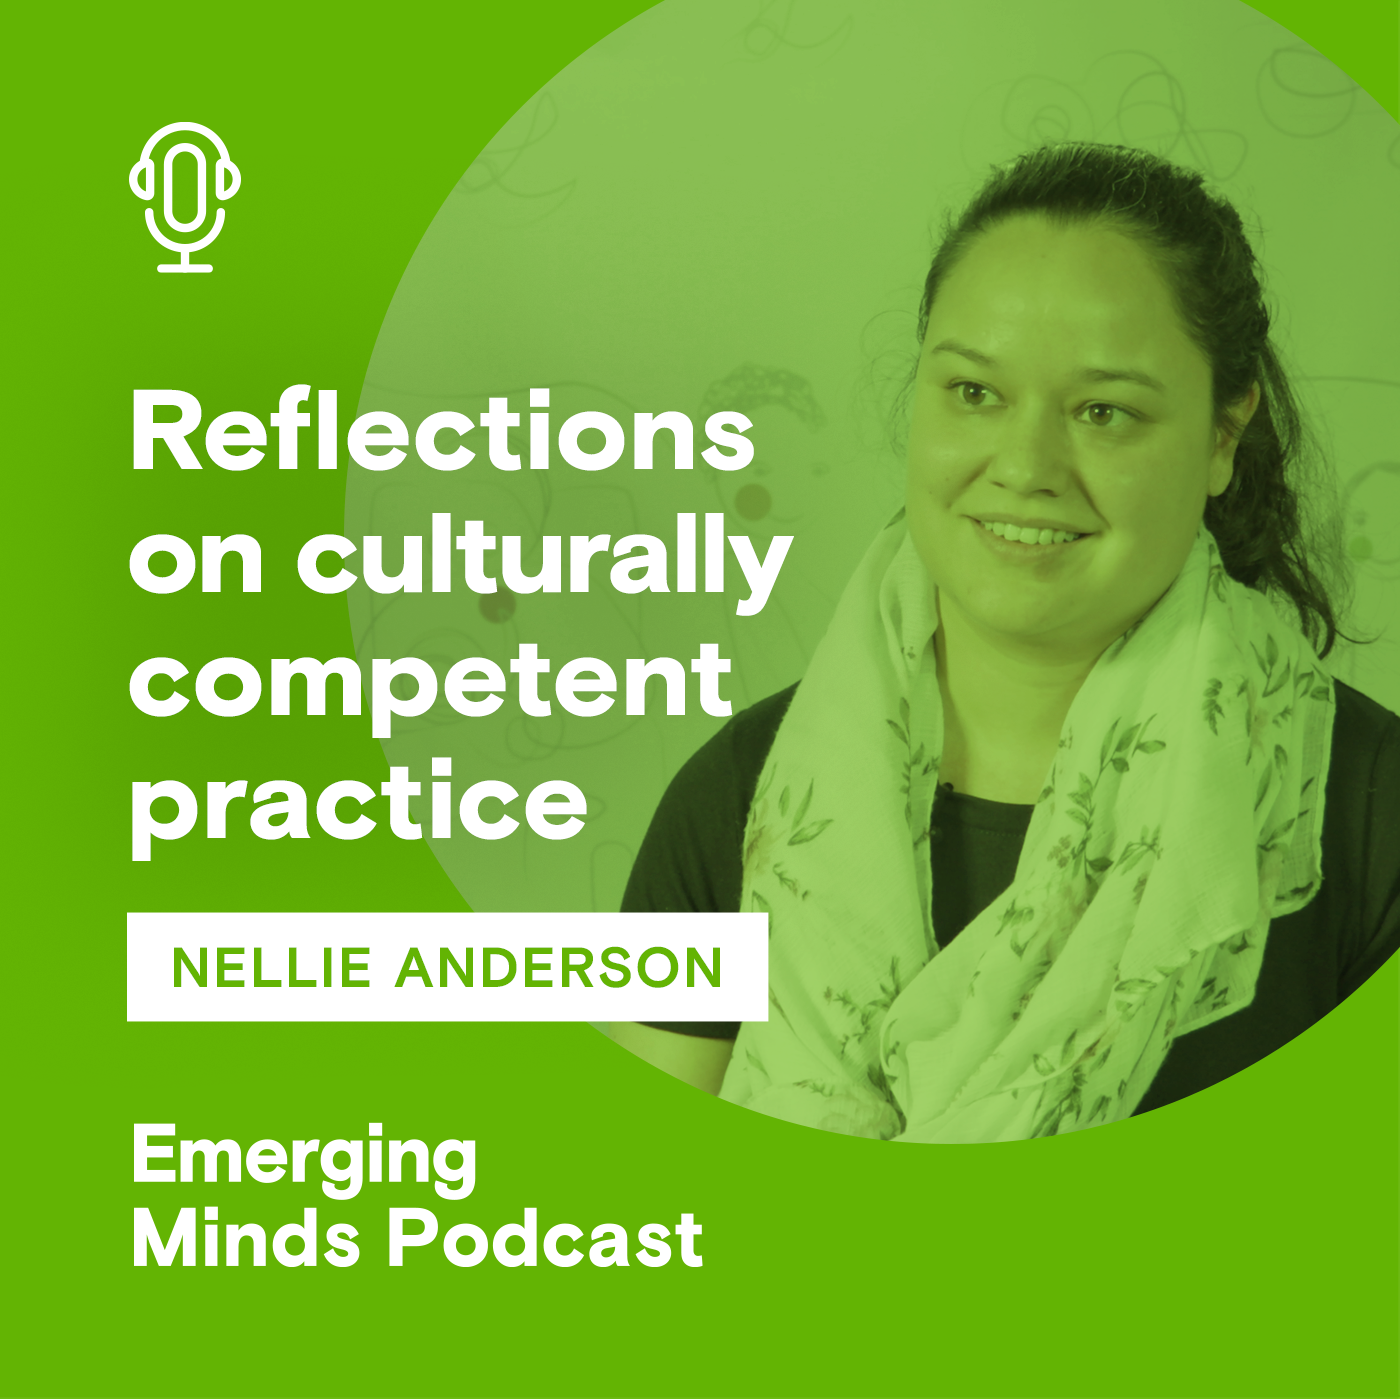 Reflections on culturally competent practice with Nellie Anderson